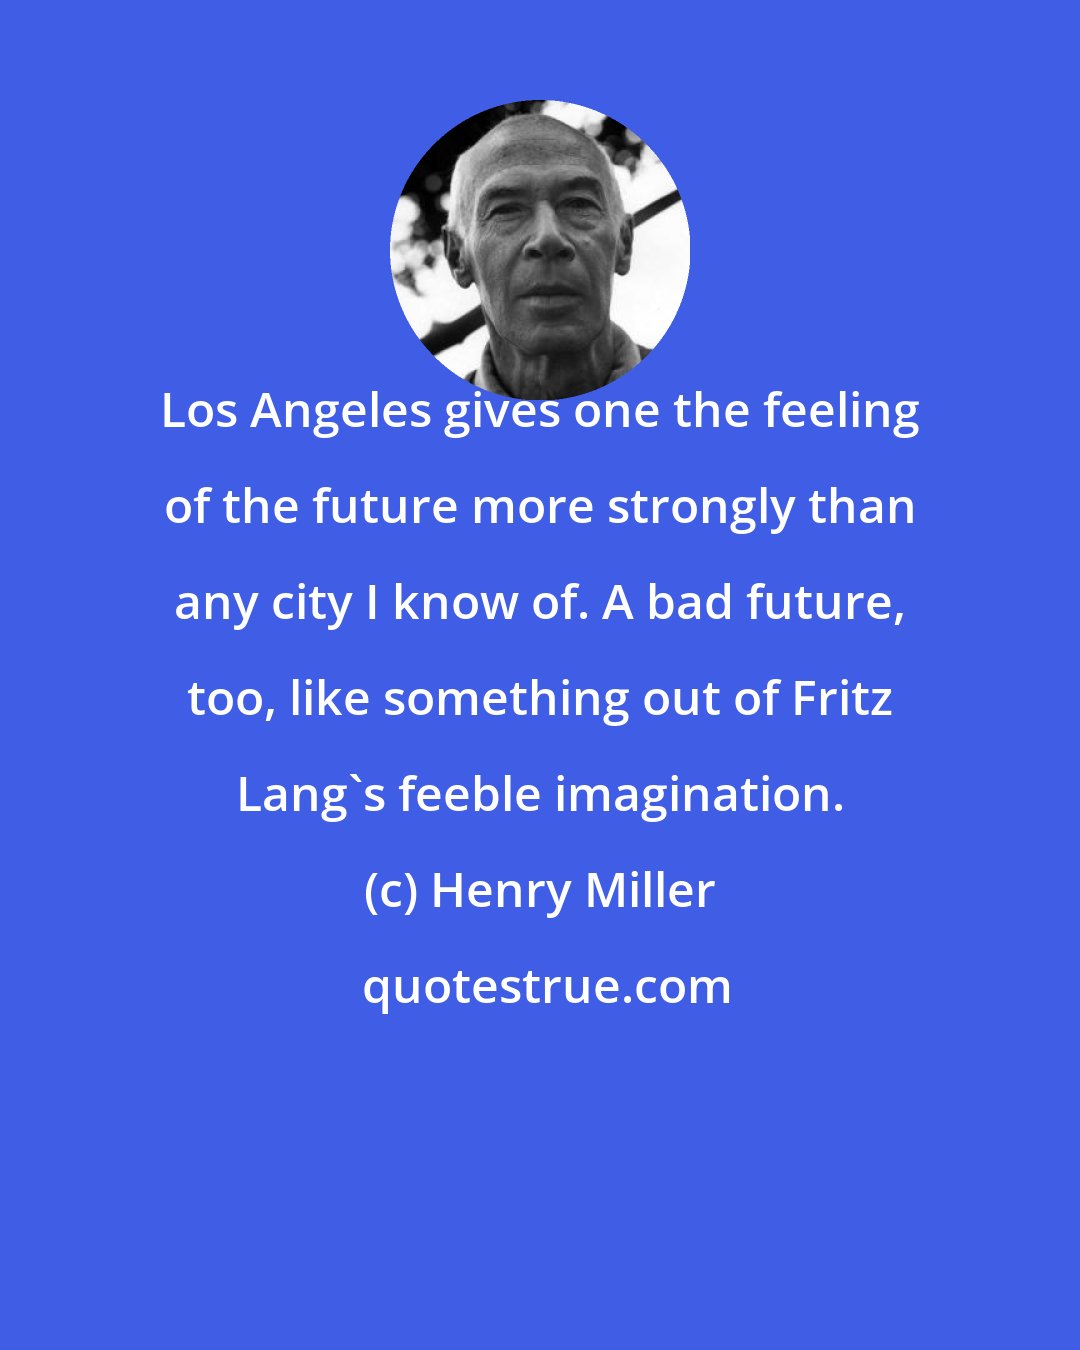 Henry Miller: Los Angeles gives one the feeling of the future more strongly than any city I know of. A bad future, too, like something out of Fritz Lang's feeble imagination.